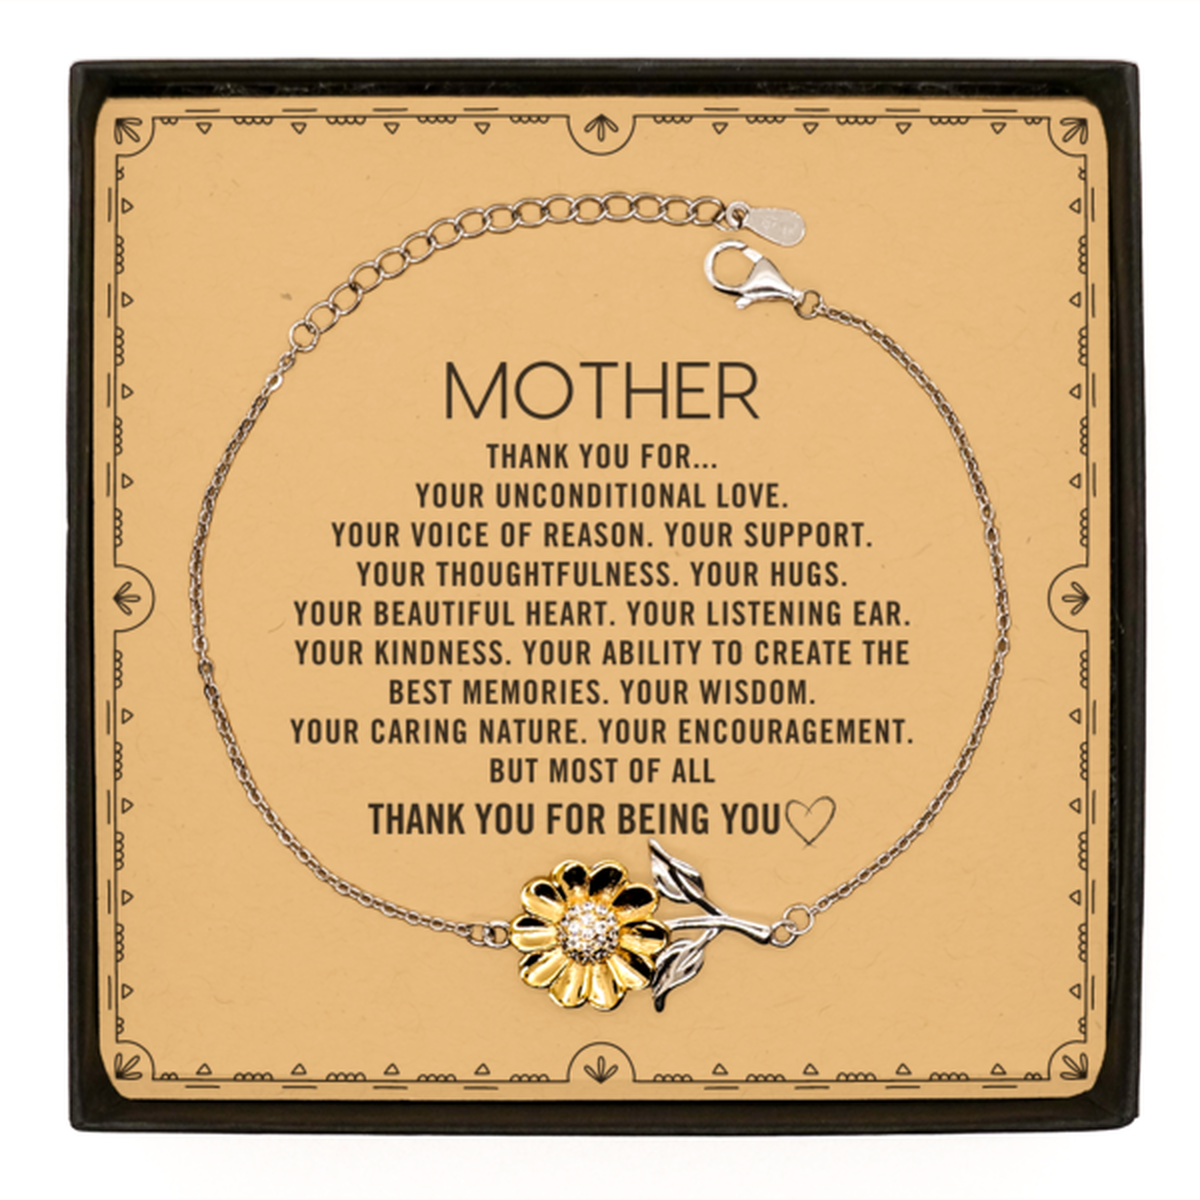 Mother Sunflower Bracelet Custom, Message Card Gifts For Mother Christmas Graduation Birthday Gifts for Men Women Mother Thank you for Your unconditional love